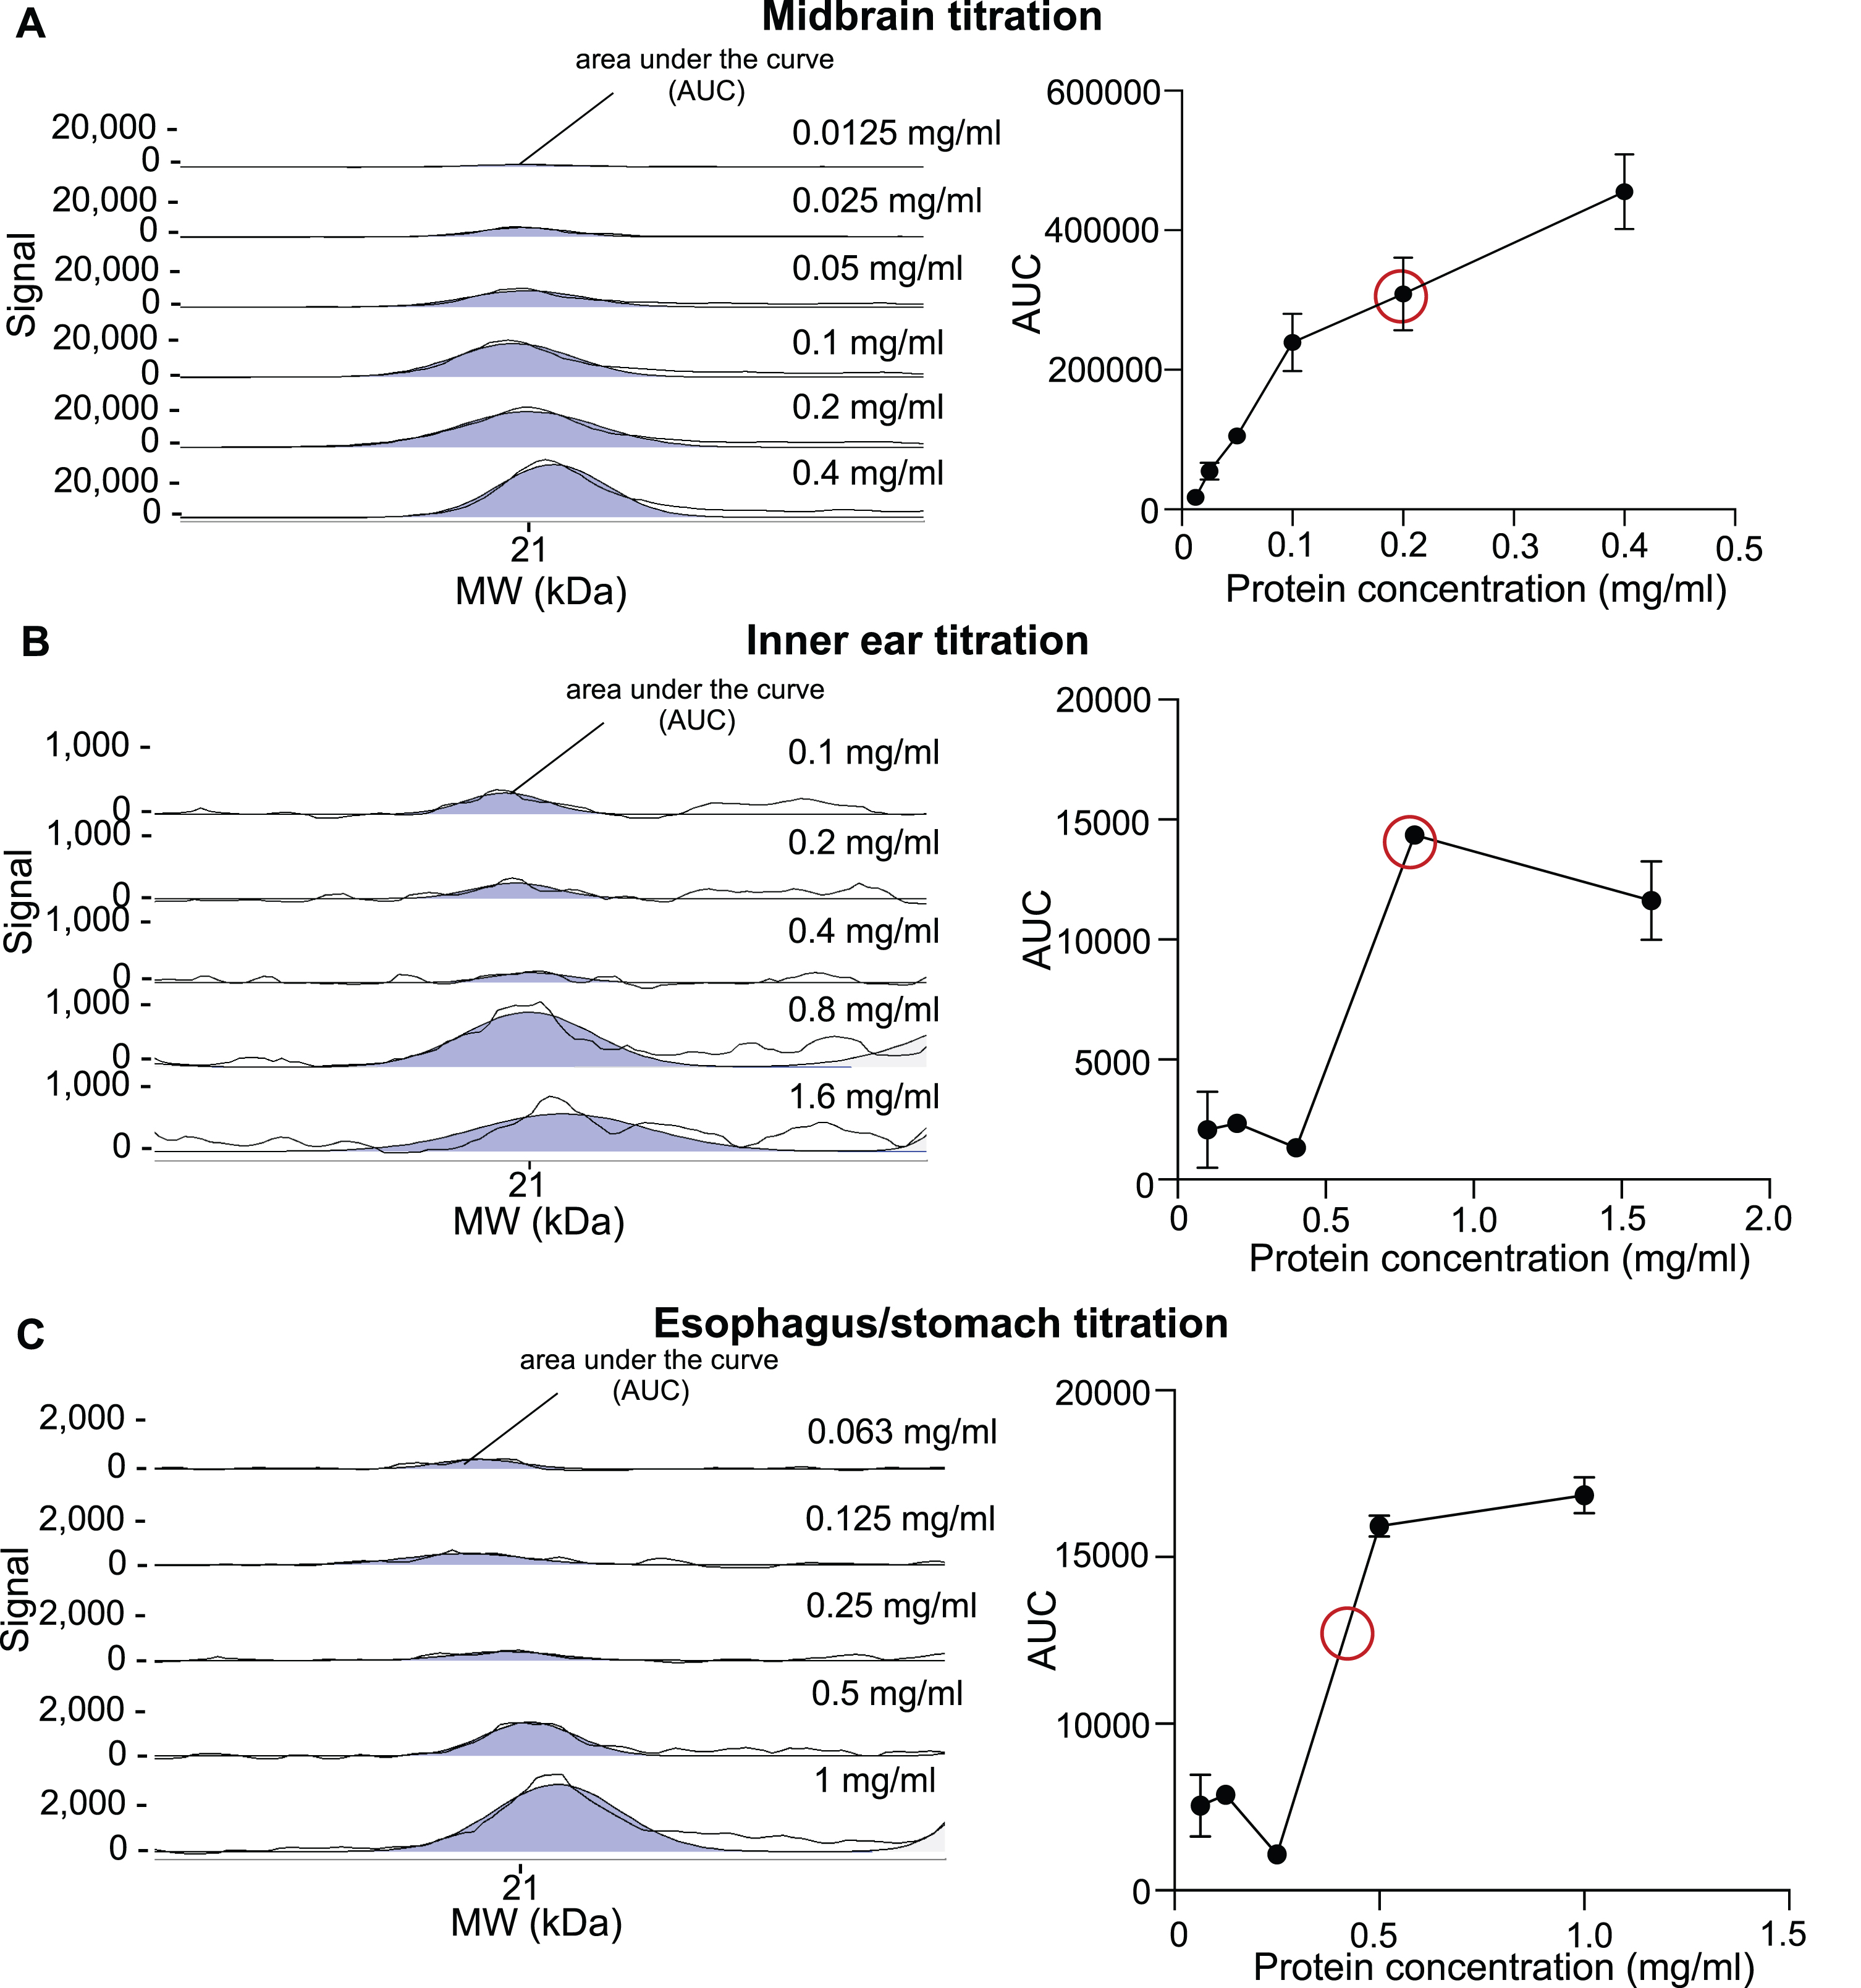 Optimization of lysate protein concentrations for midbrain, inner ear, and esophagus/stomach tissues for CE using anti-total aSyn antibody. Tissue lysate dilutions with different protein concentrations, ranging from 0.0125 mg/ml to 1.6 mg/ml, were subjected to CE Simple Western immunoassay using anti-total aSyn primary antibody at a dilution of 1 : 40. The selected electropherograms are shown on the left-hand side. The black lines represent both the selected electropherogram curve and a curve representing the adaptation to the fitted peaks. On the right, the quantified areas under the curve (AUC) were plotted against the corresponding protein concentrations. The useful linear assay range was estimated from the curve. The concentration chosen within the linear range for aSyn detection (red circle) remains tissue-specific and corresponds to 0.2 mg/ml for midbrain tissue lysate (A), 0.8 mg/ml for inner ear tissue lysate (B), and 0.4 mg/ml for esophagus/stomach tissue lysate (C).